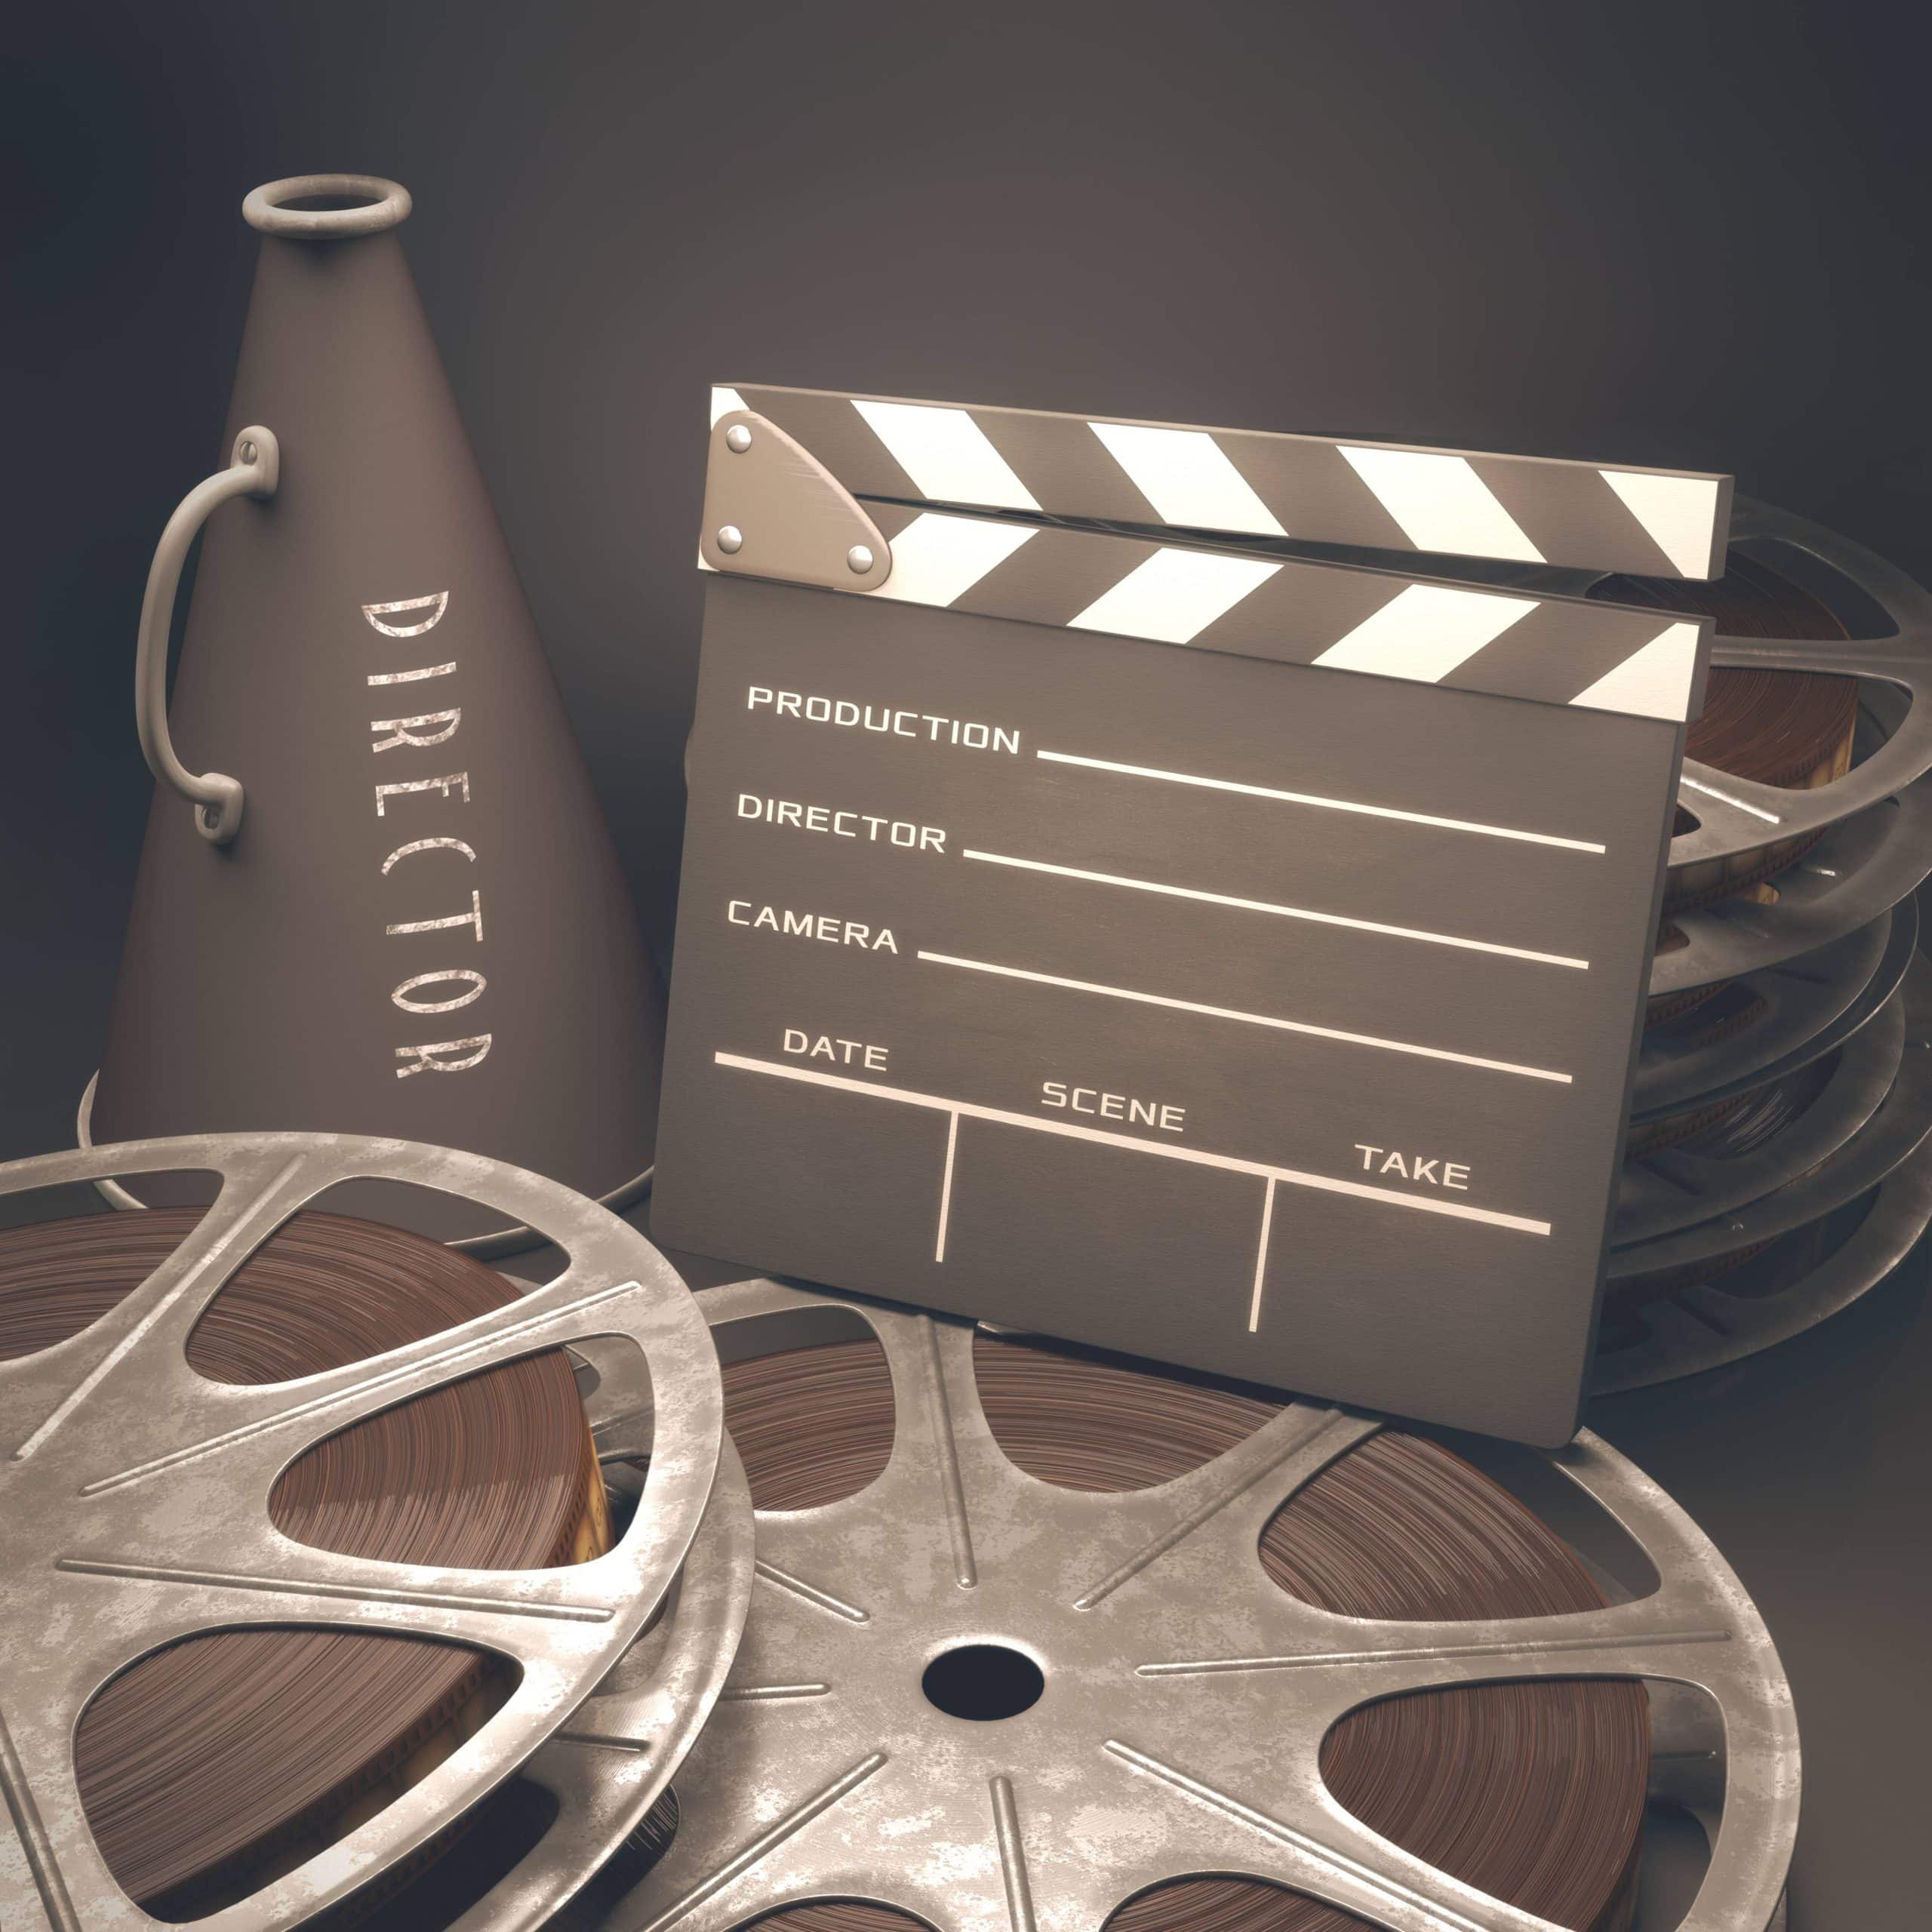 Hollywood film studio tips for craft services